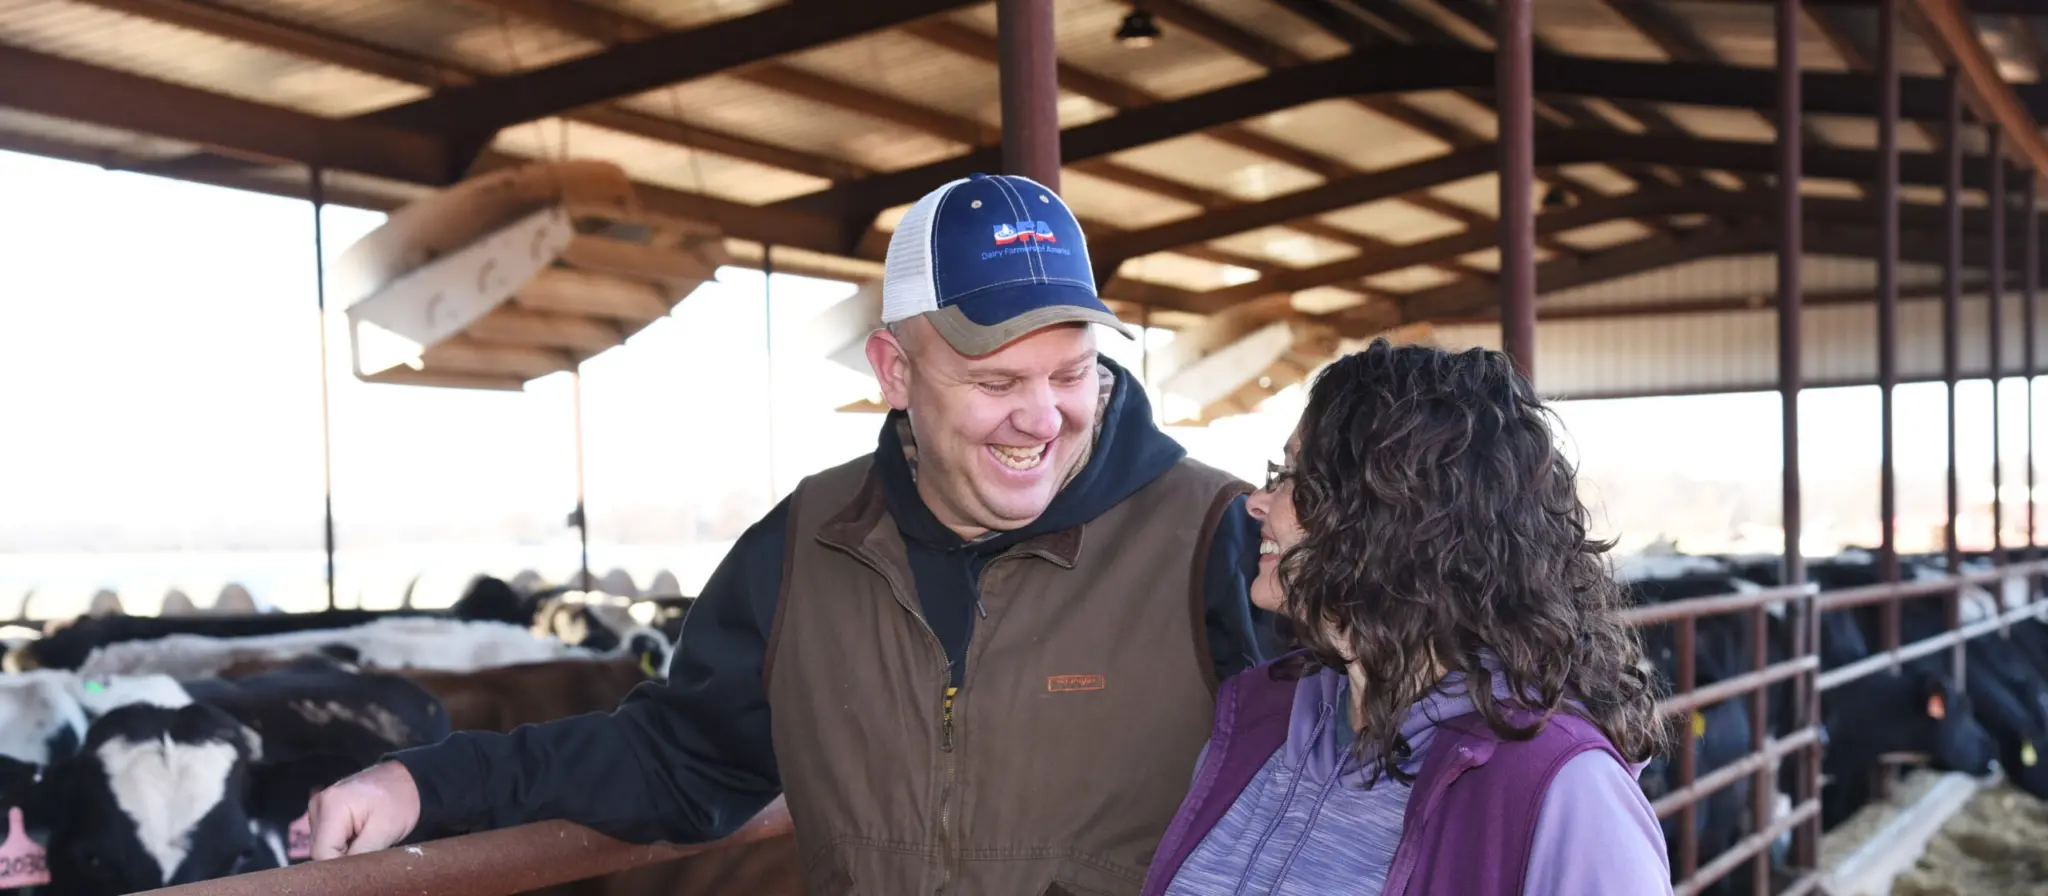 A man and a woman stand next to cows in a pen, smiling and laughing.